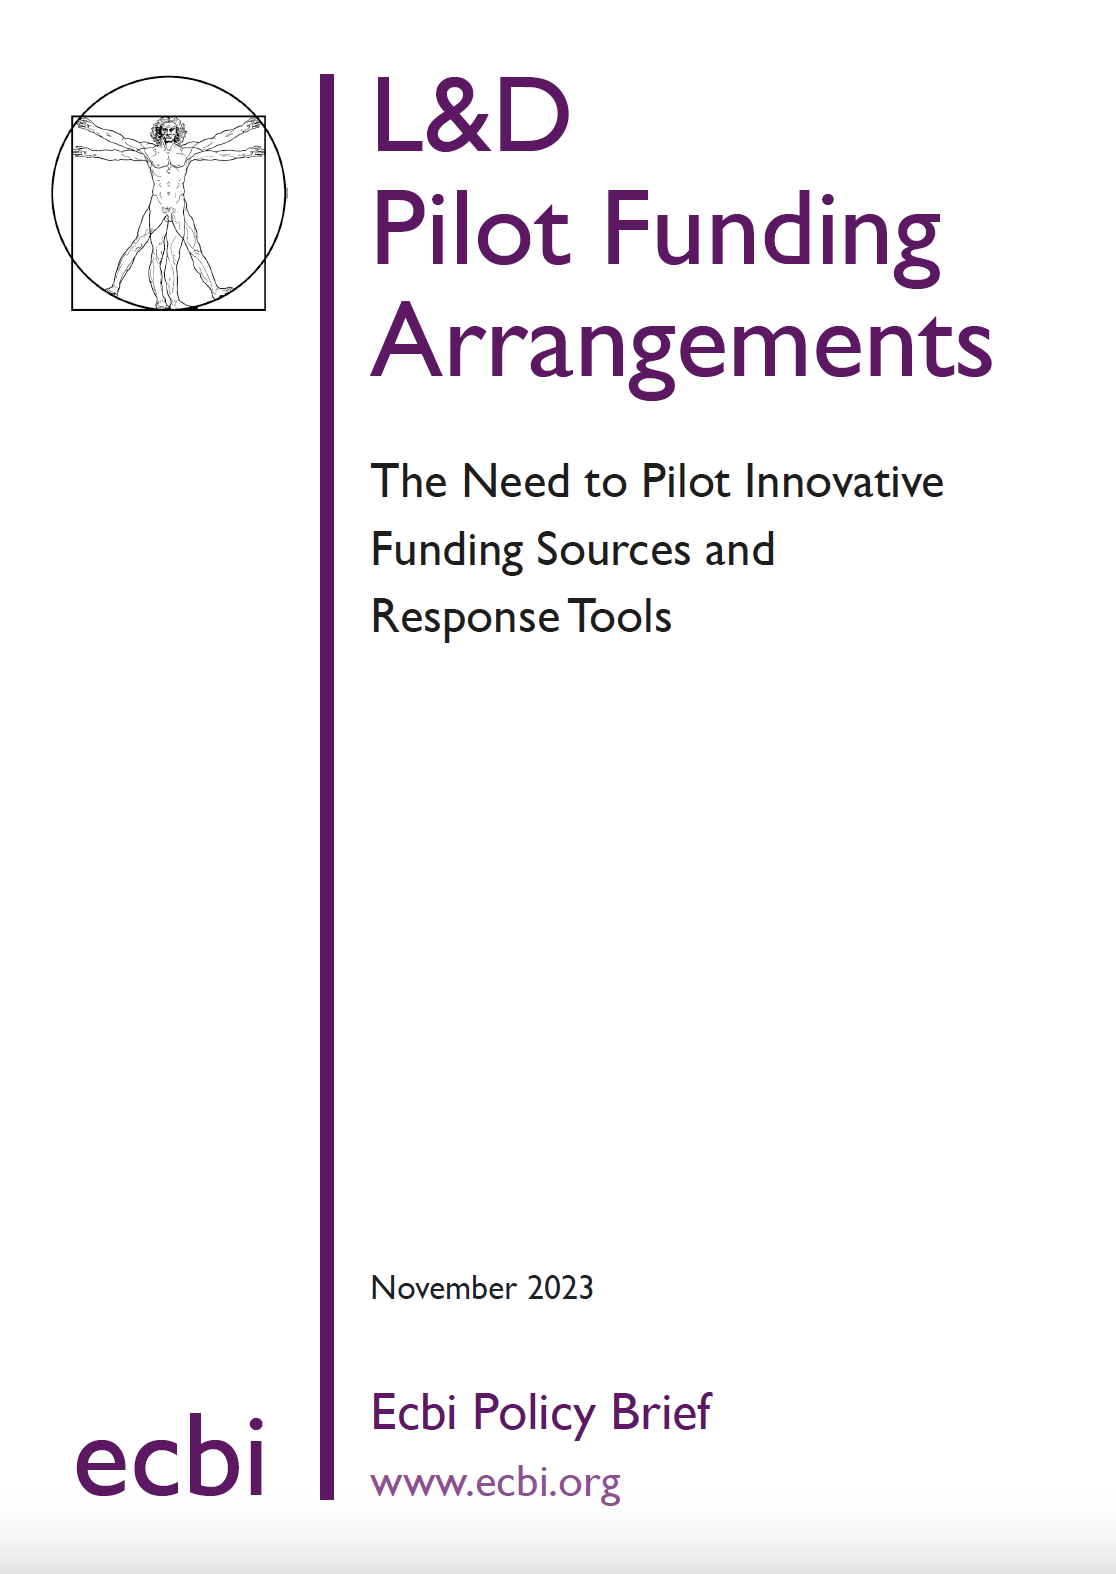 L&D Pilot Funding Arrangements - Tools to respond to non-economic loss and damage